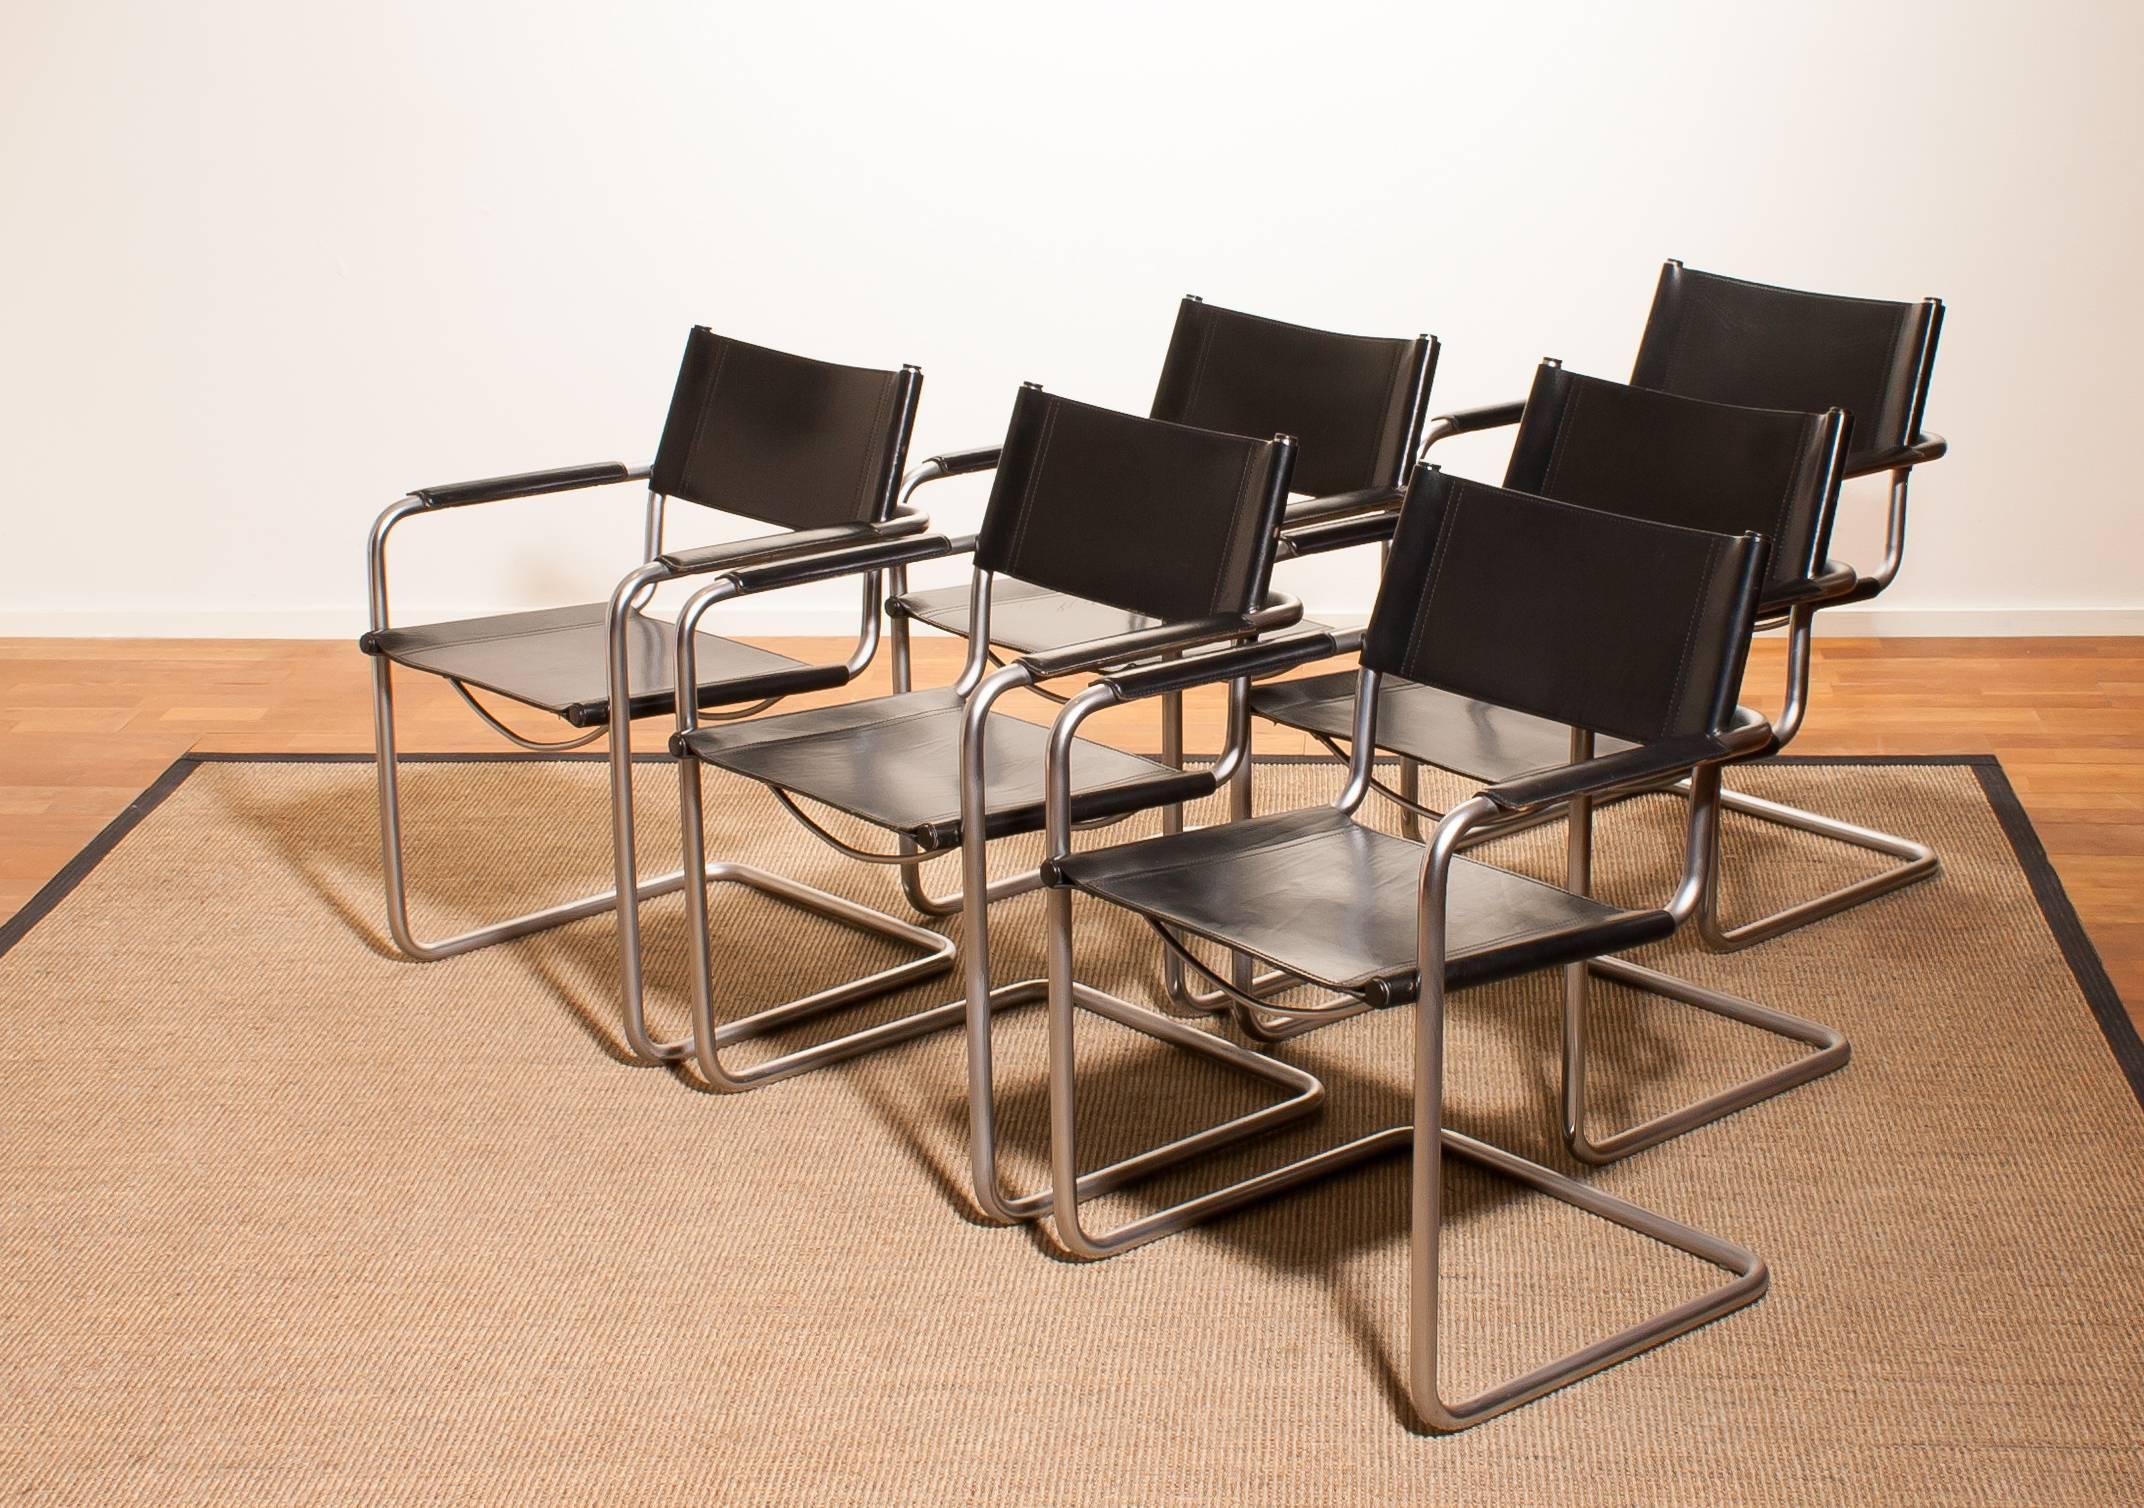 A beautiful set of six dining chairs made by Matteo Grassi, Italy.
The chairs have tubular titanium look steel frames with sturdy black leather seating and backrest.
They are signed on the back of the backrest.
The chairs are in very nice